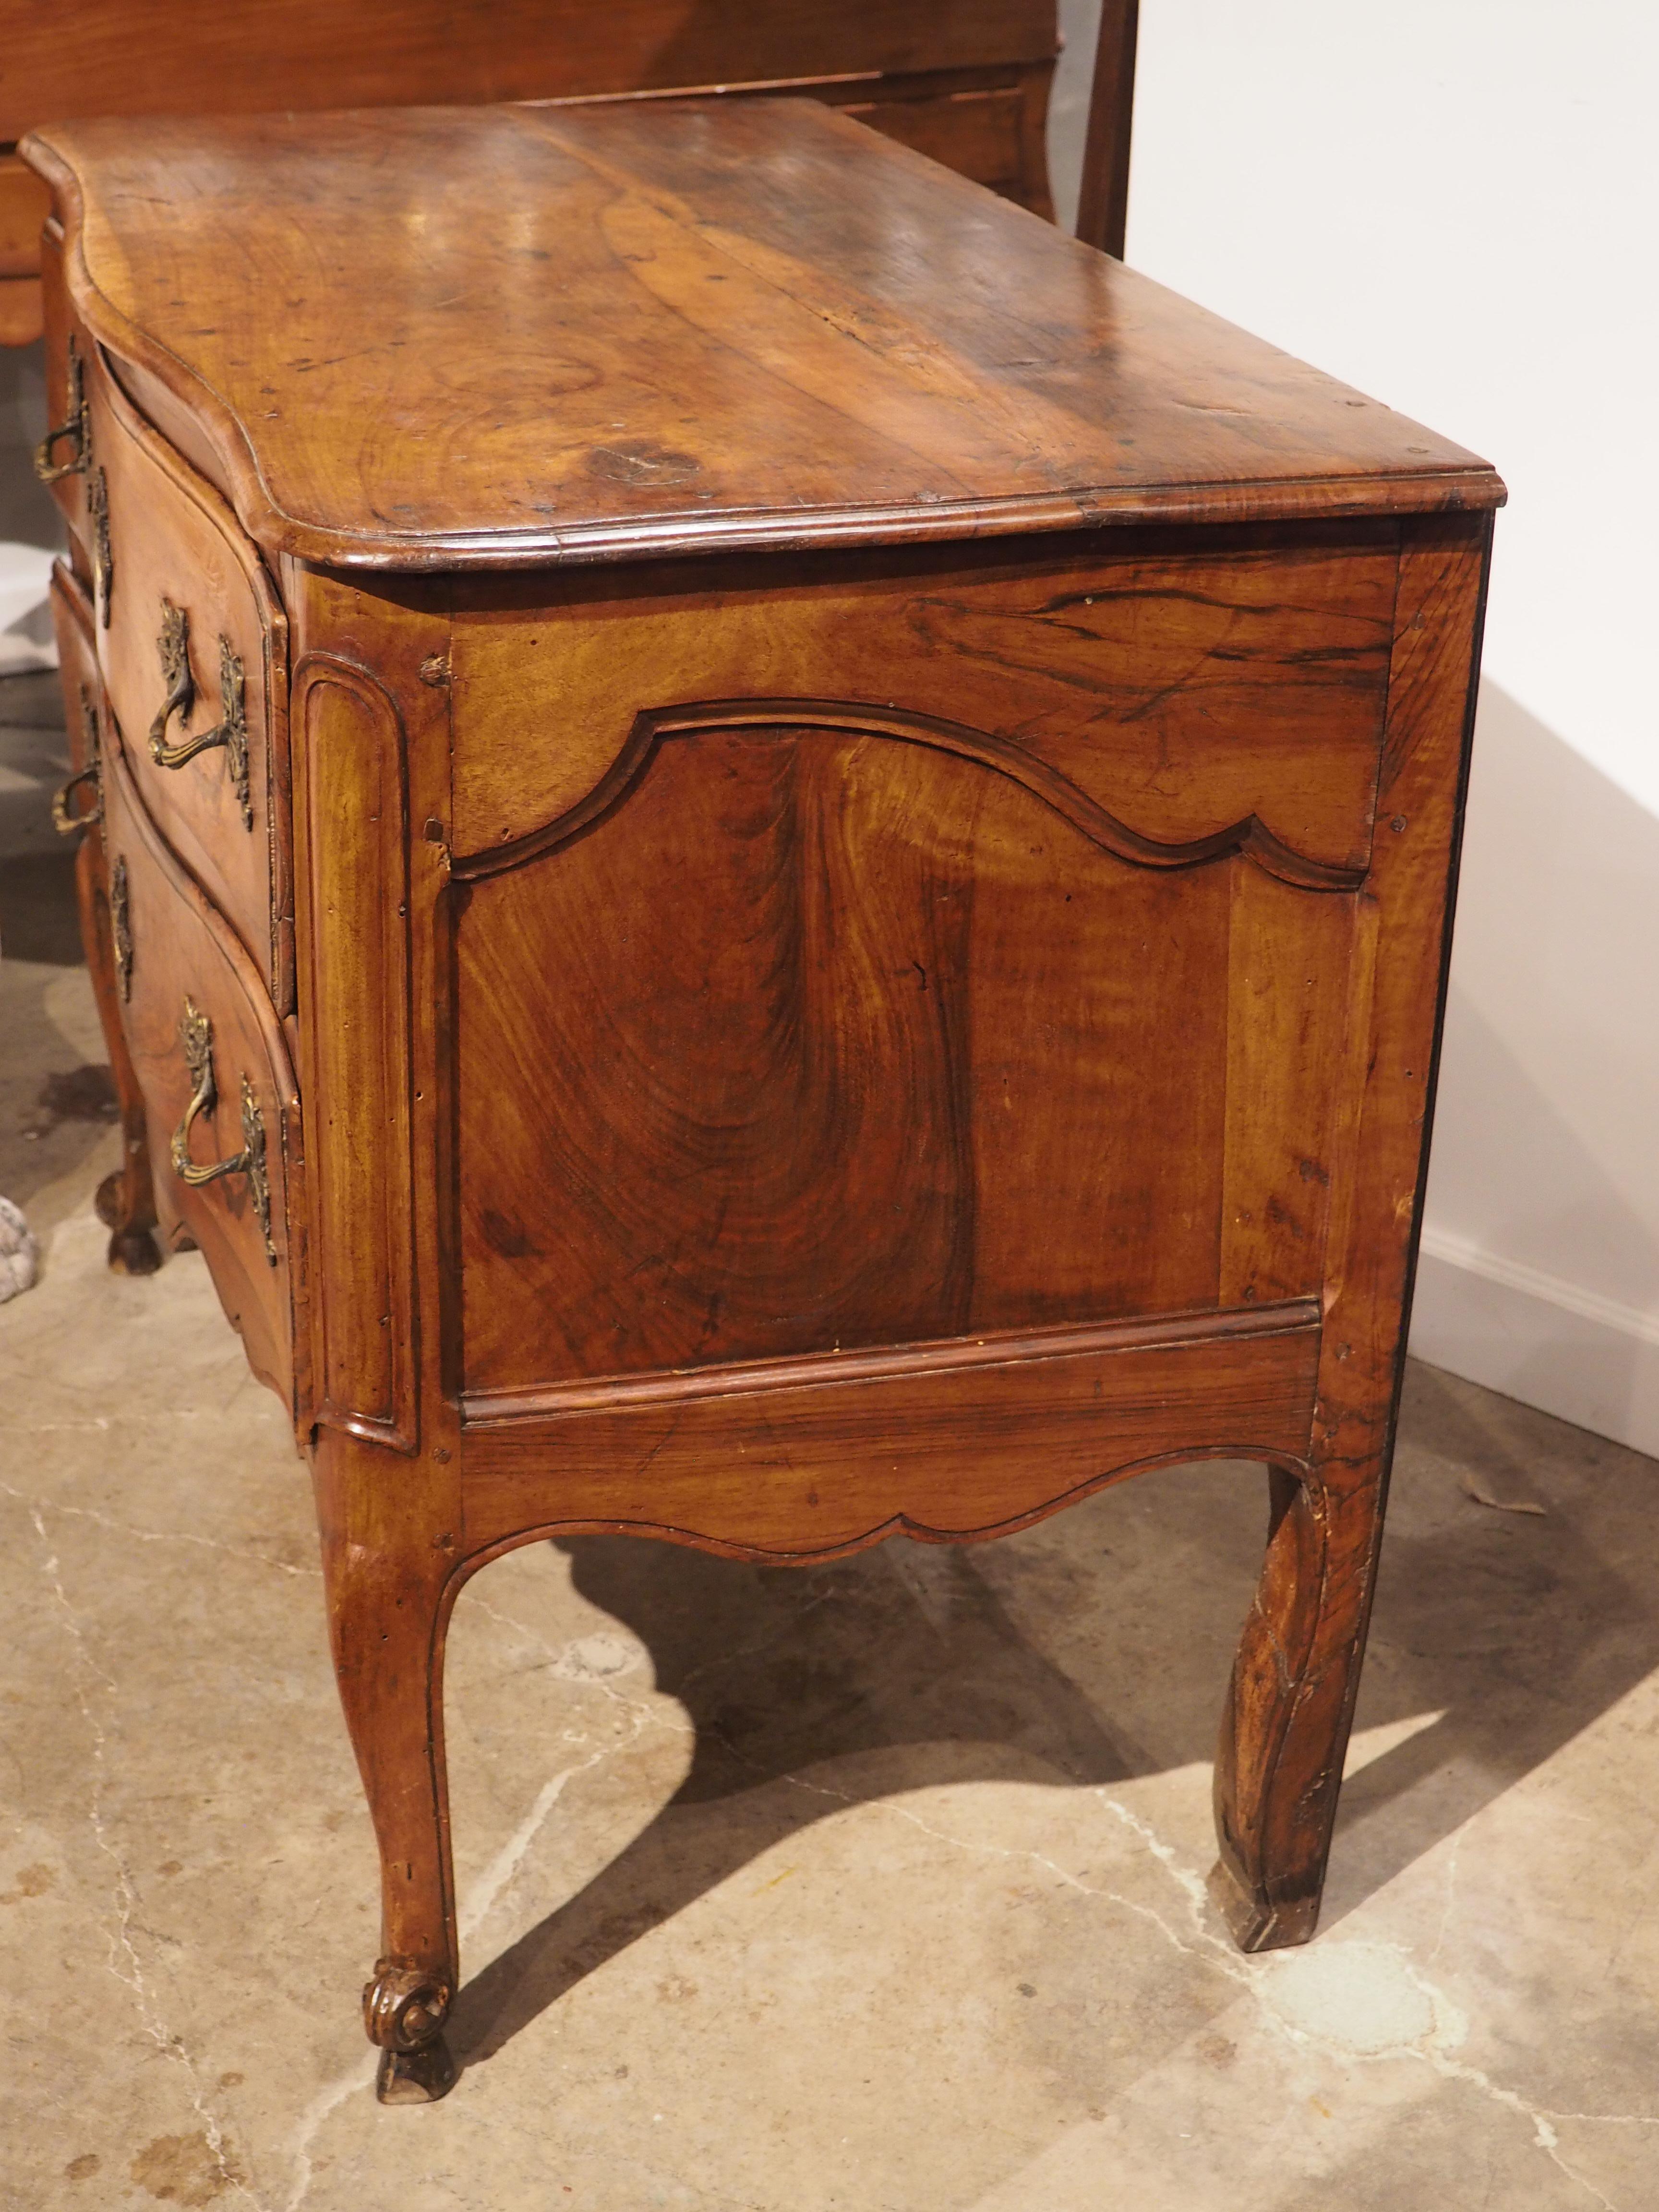 Known as a commode sauteuse, this walnut chest of drawers was hand-carved in France in the 1700s during the reign of Louis XV, making it a period piece. Notice the long, curvy cabriole front legs (the back legs have a more subtle contour) beneath a